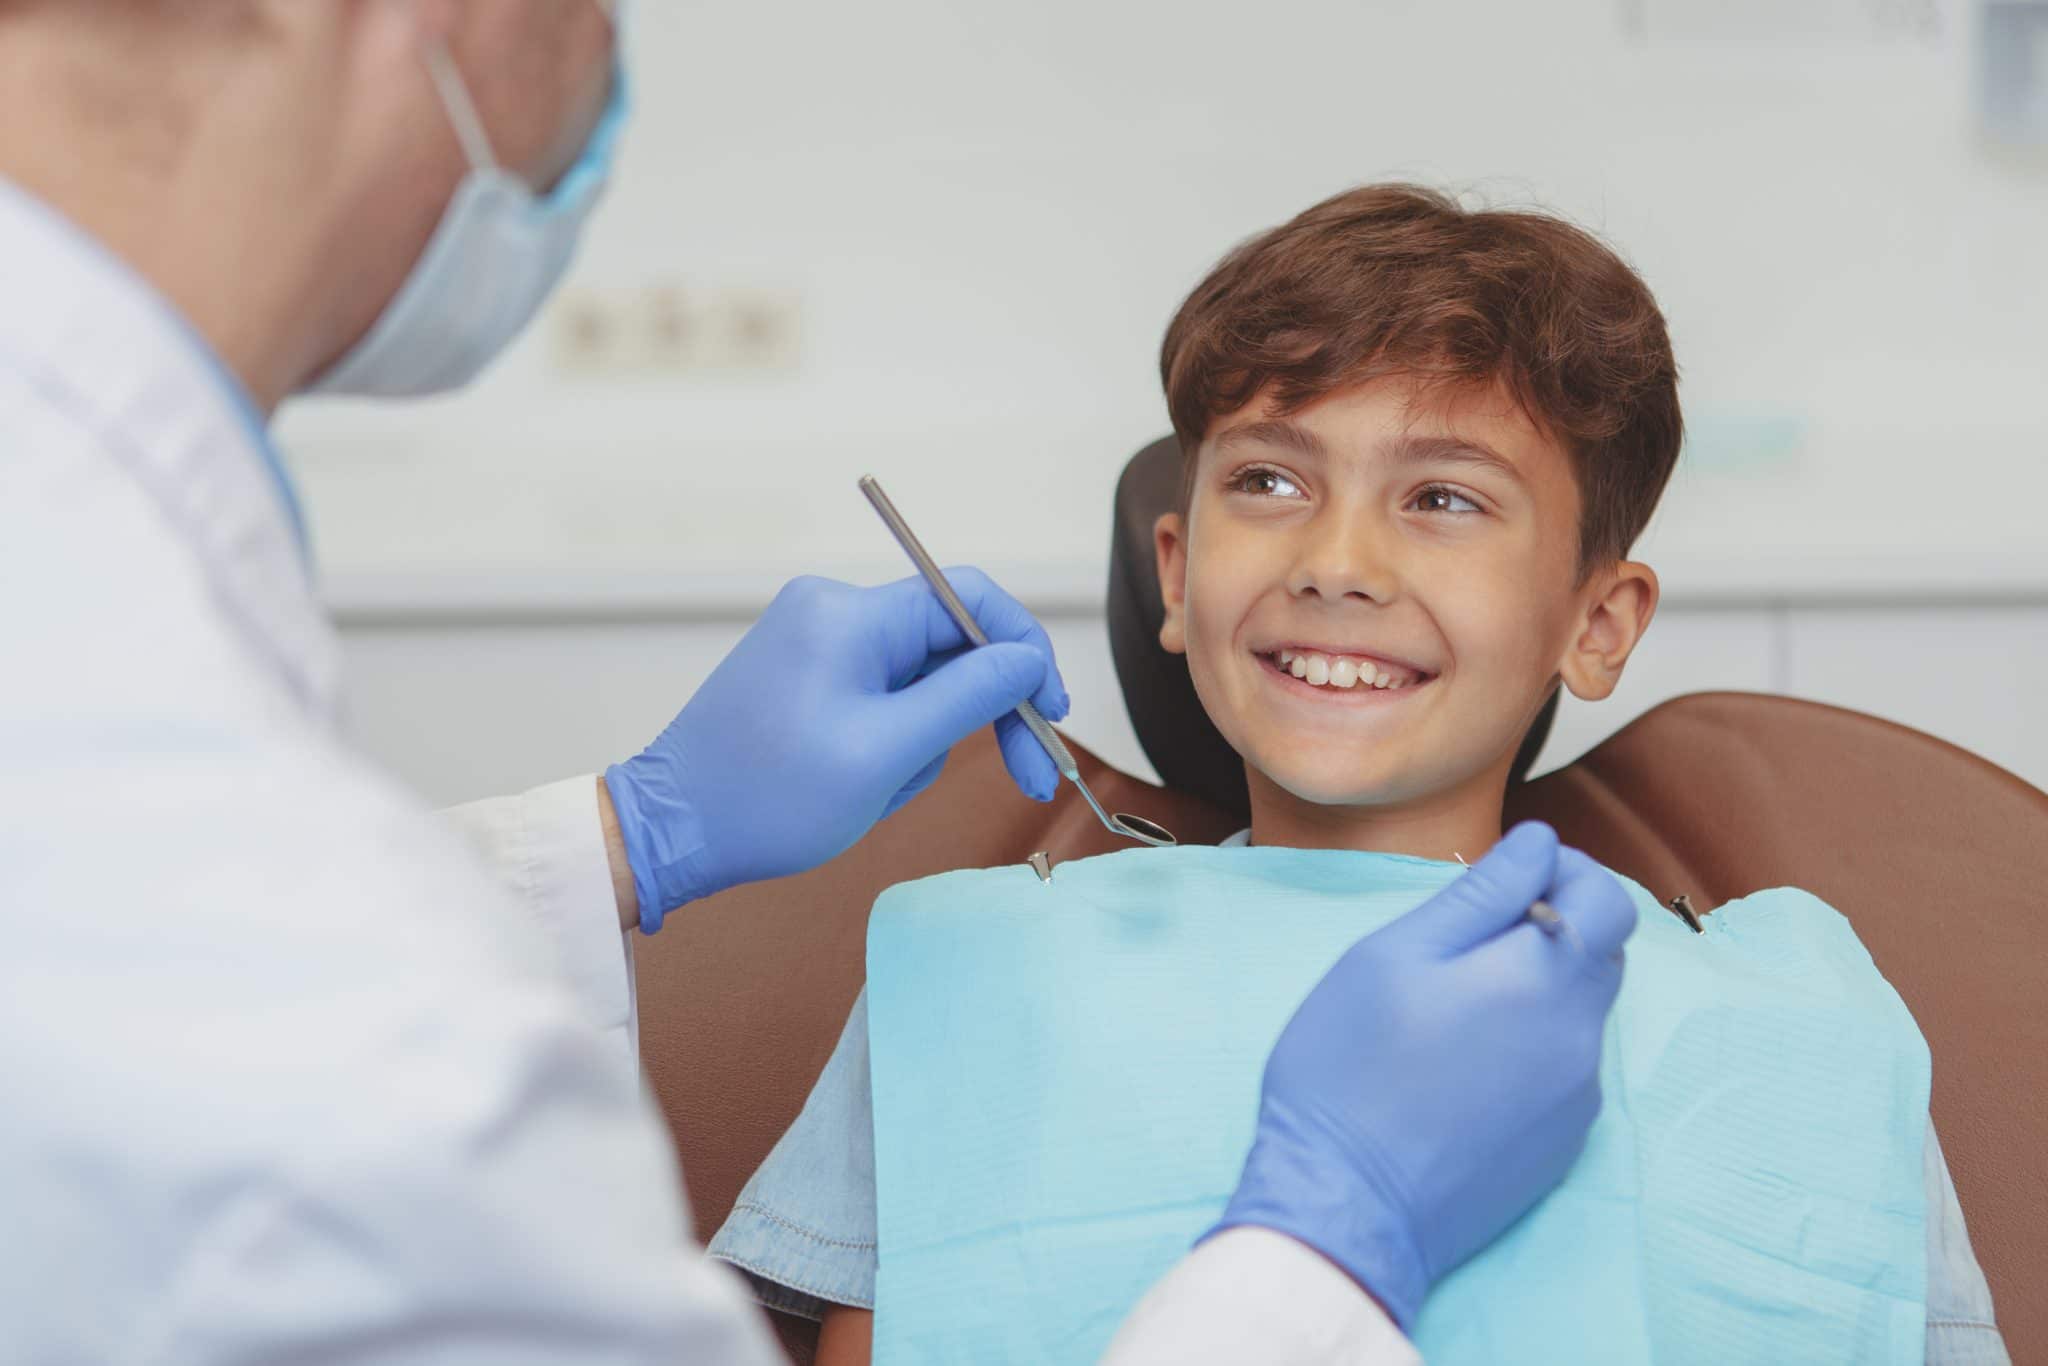 Adorable happy healthy boy smiling cheerfully at his dentist, sitting in a dental chair. Cropped shot of a professional dentist checking teeth of a lovely boy